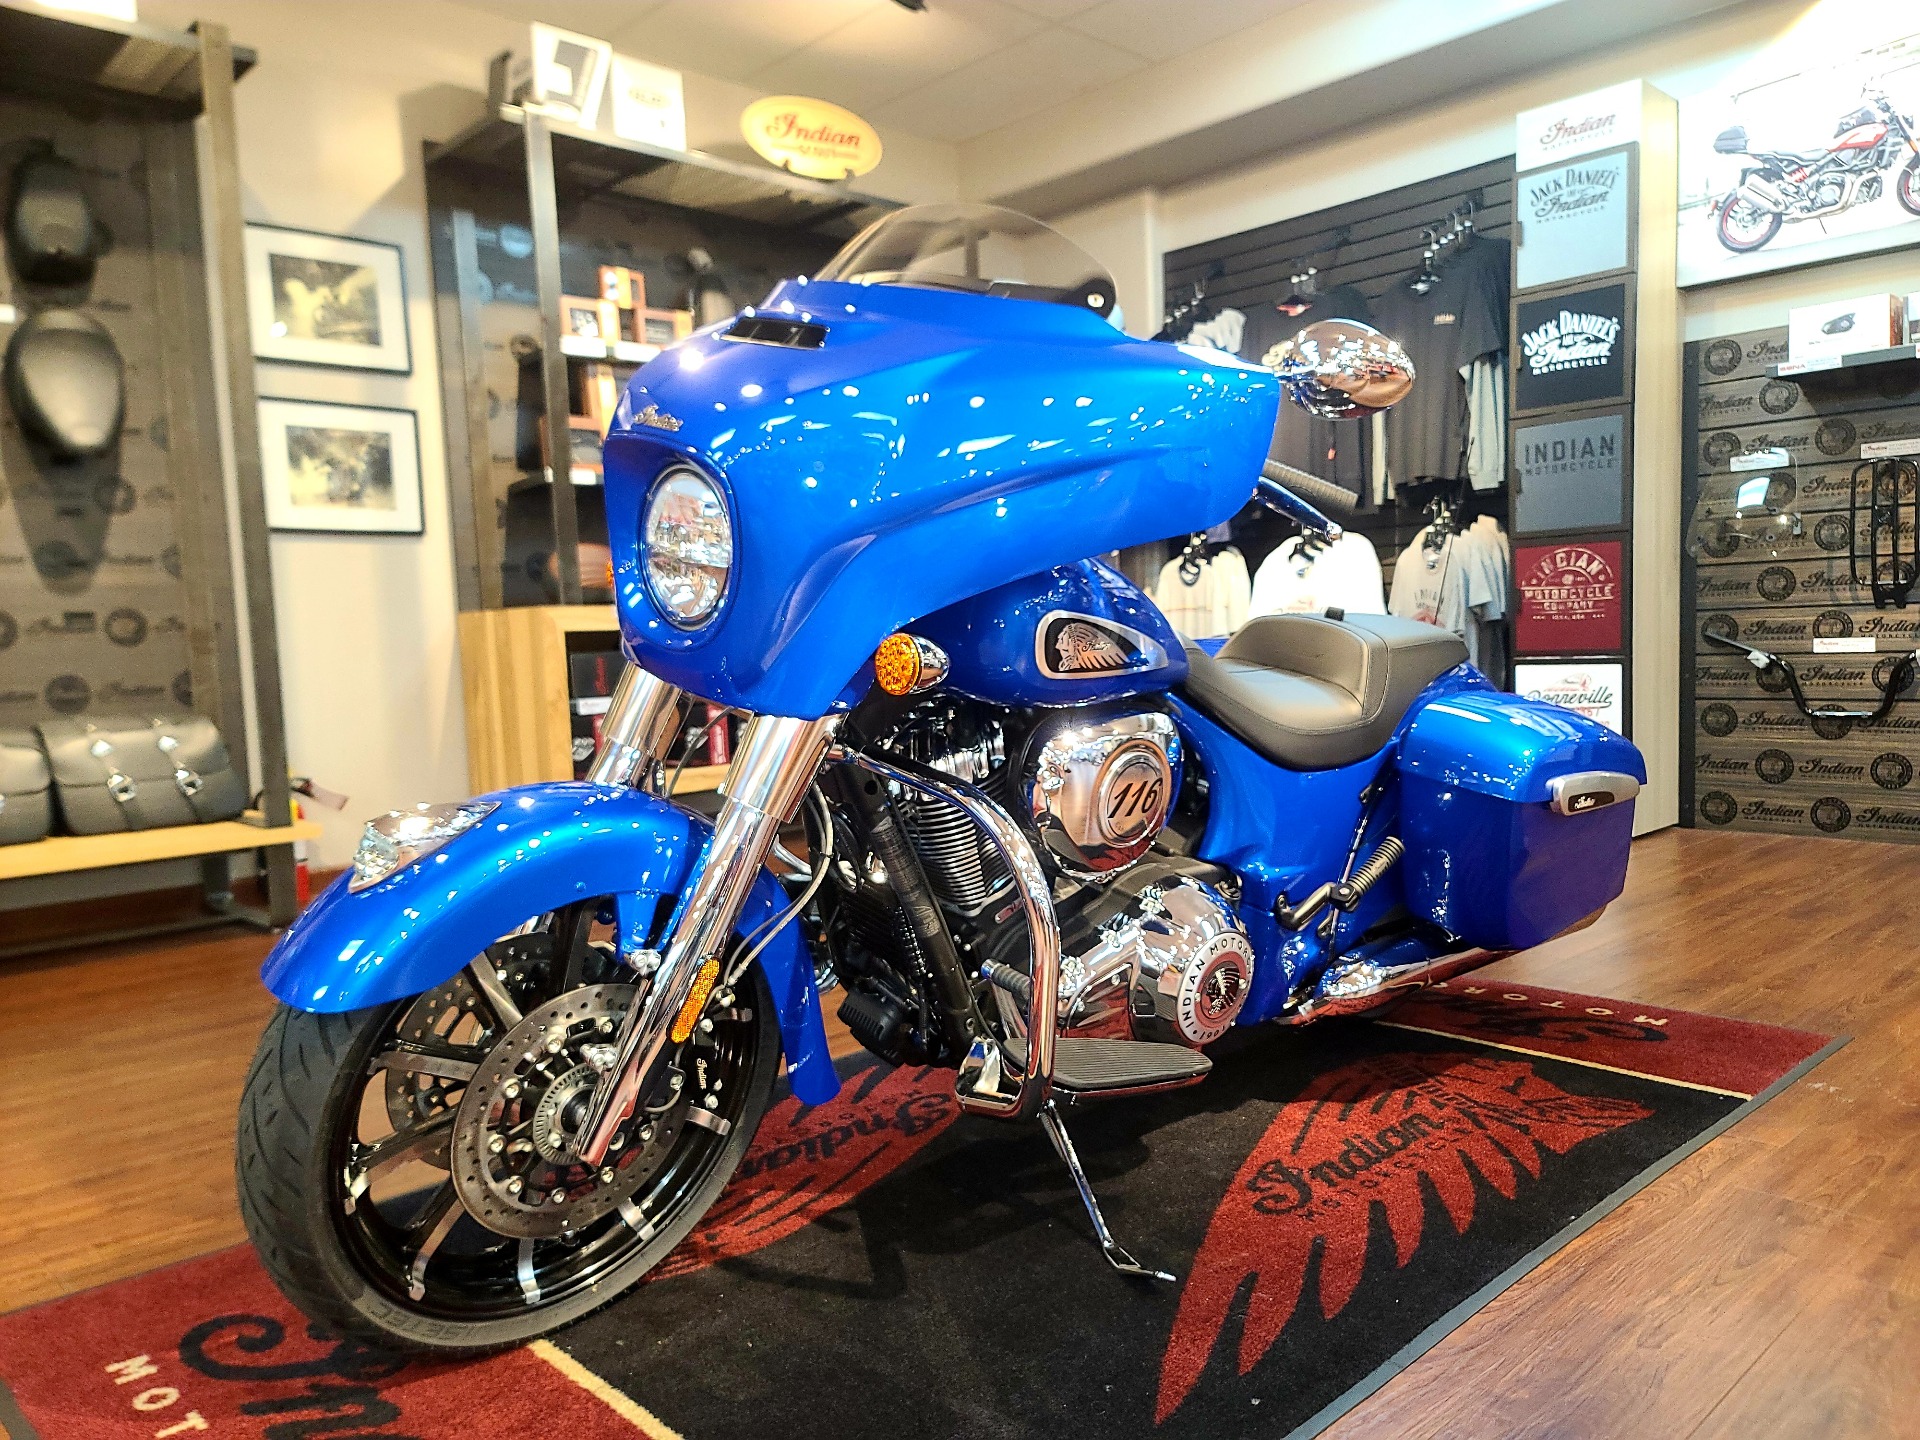 2021 Indian Chieftain® Limited in EL Cajon, California - Photo 6